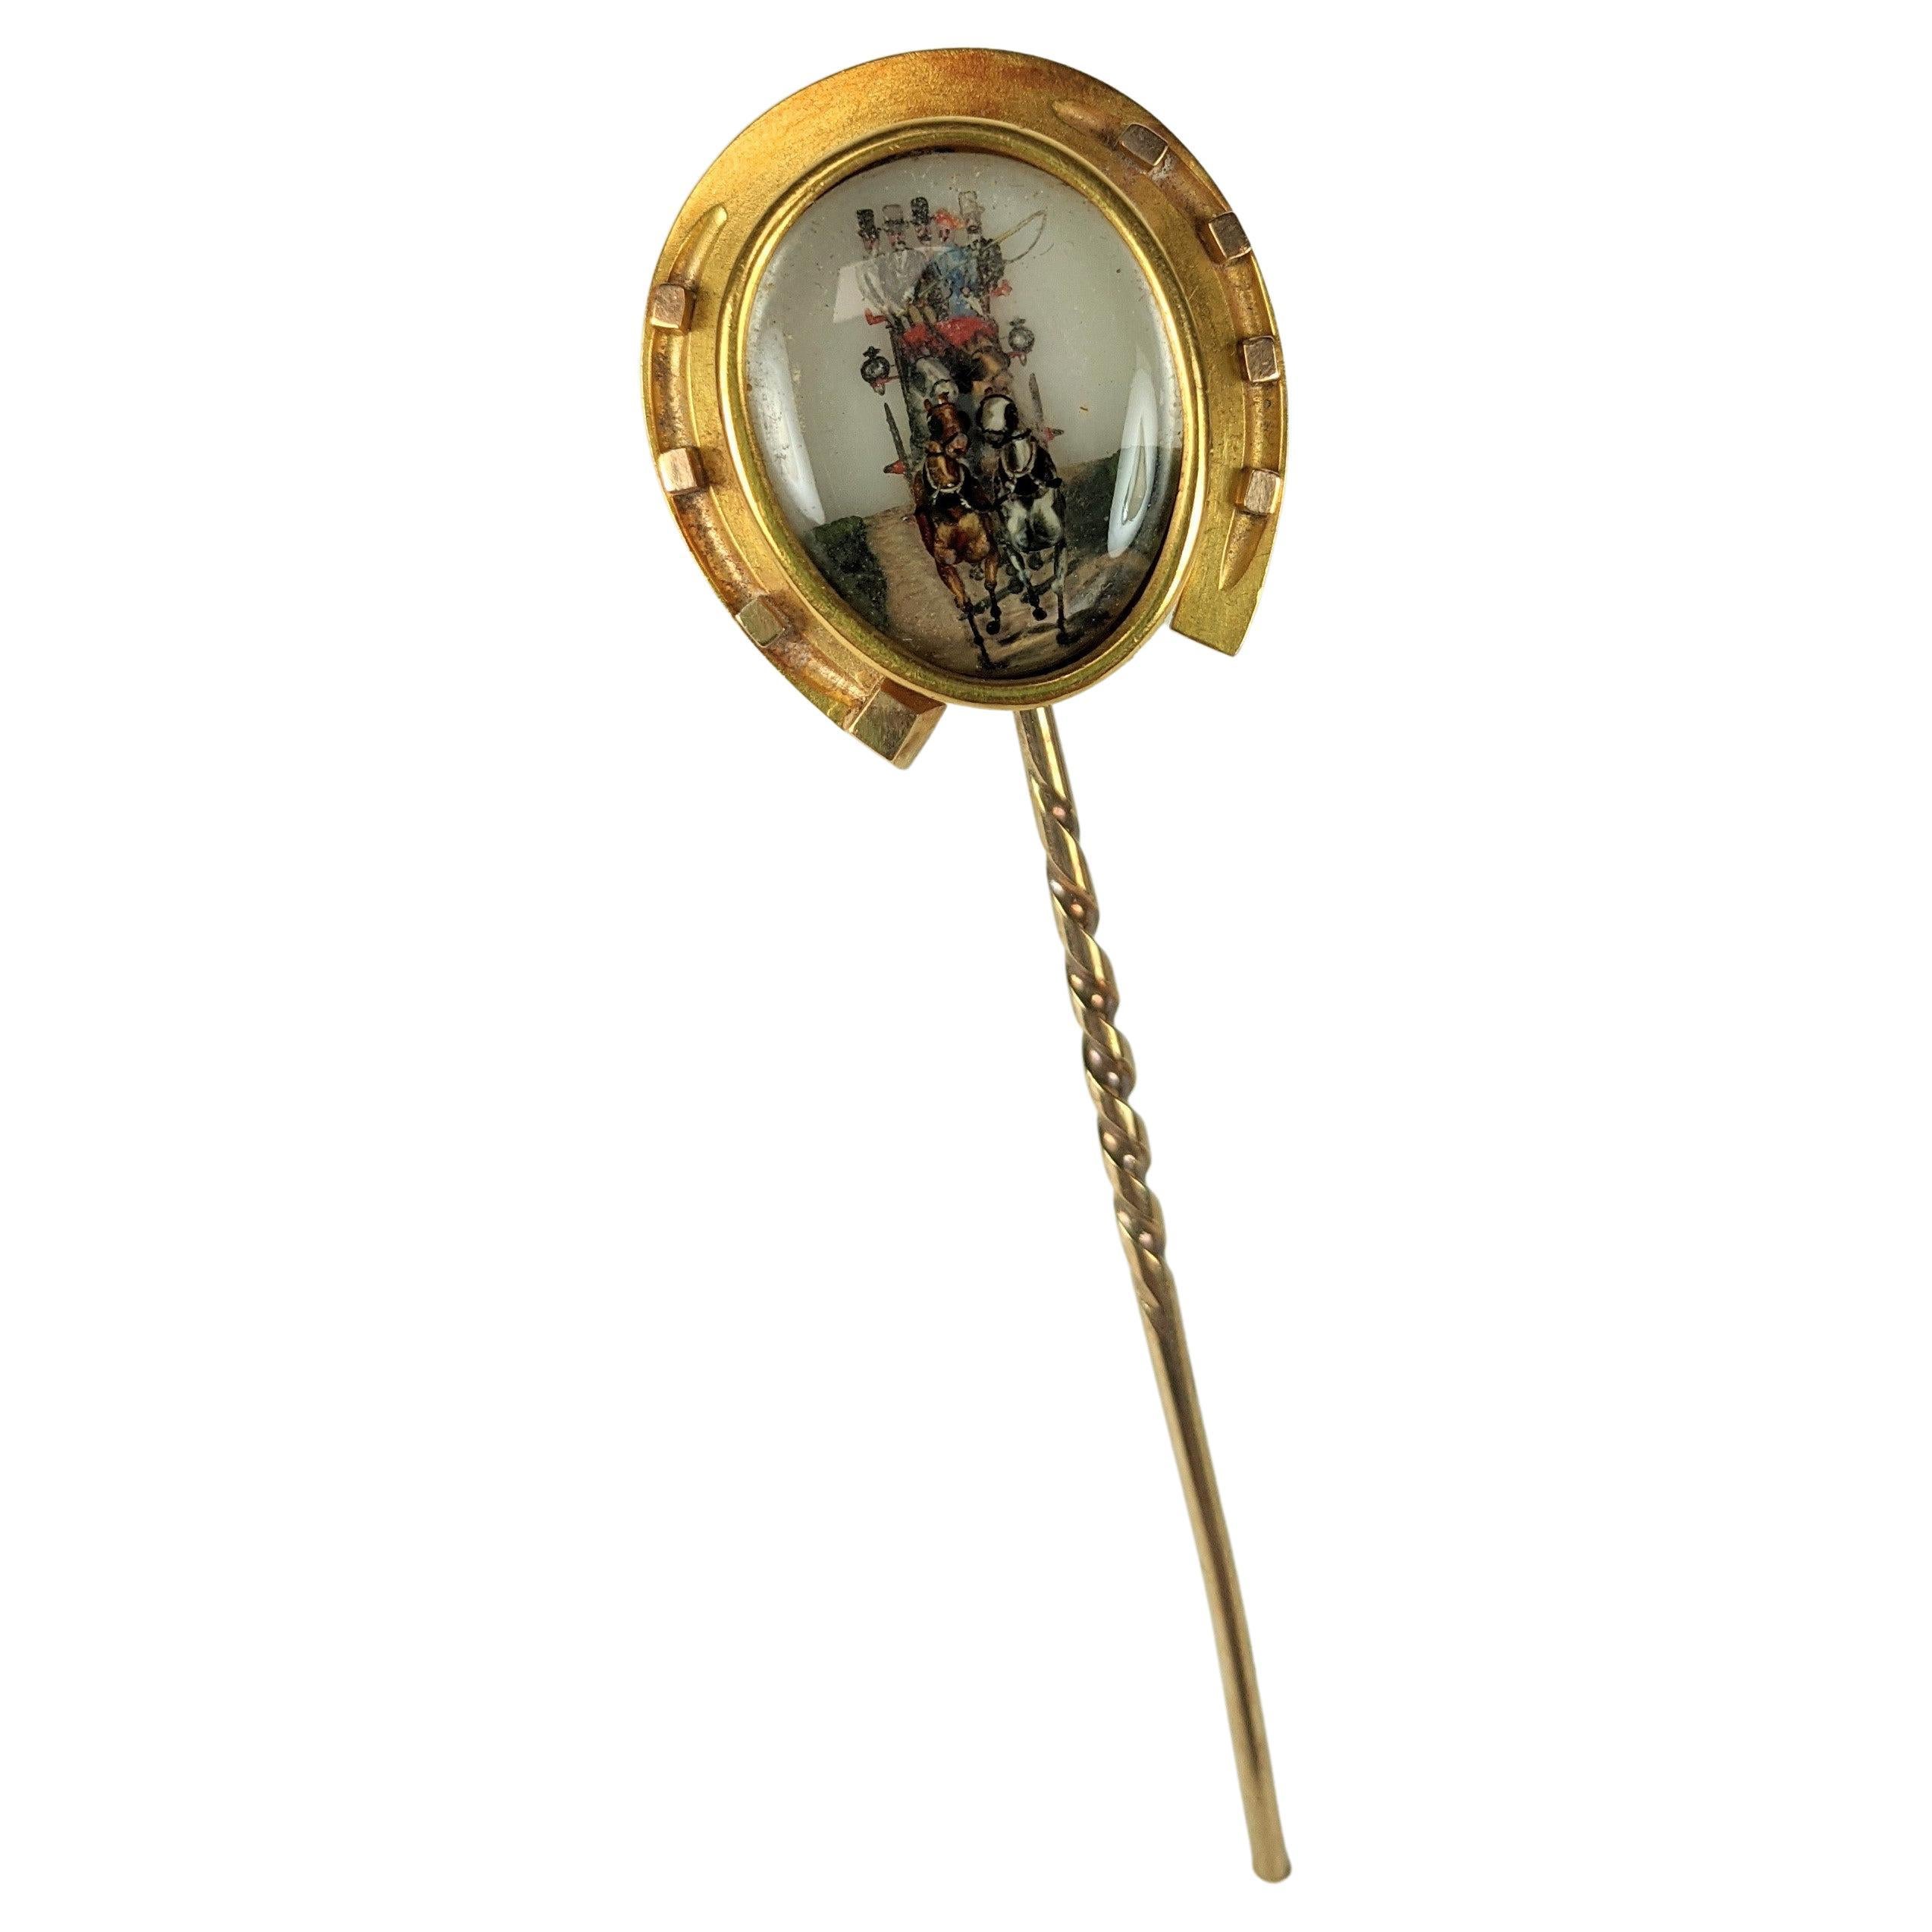 Wonderful and rare Tiffany Reverse Crystal Victorian Stickpin. Substantial size and quality with an incredible oval hand painted Essex crystal of riders galloping on a horse drawn buggy towards the viewer. There are 4 gentlemen and on lady in the